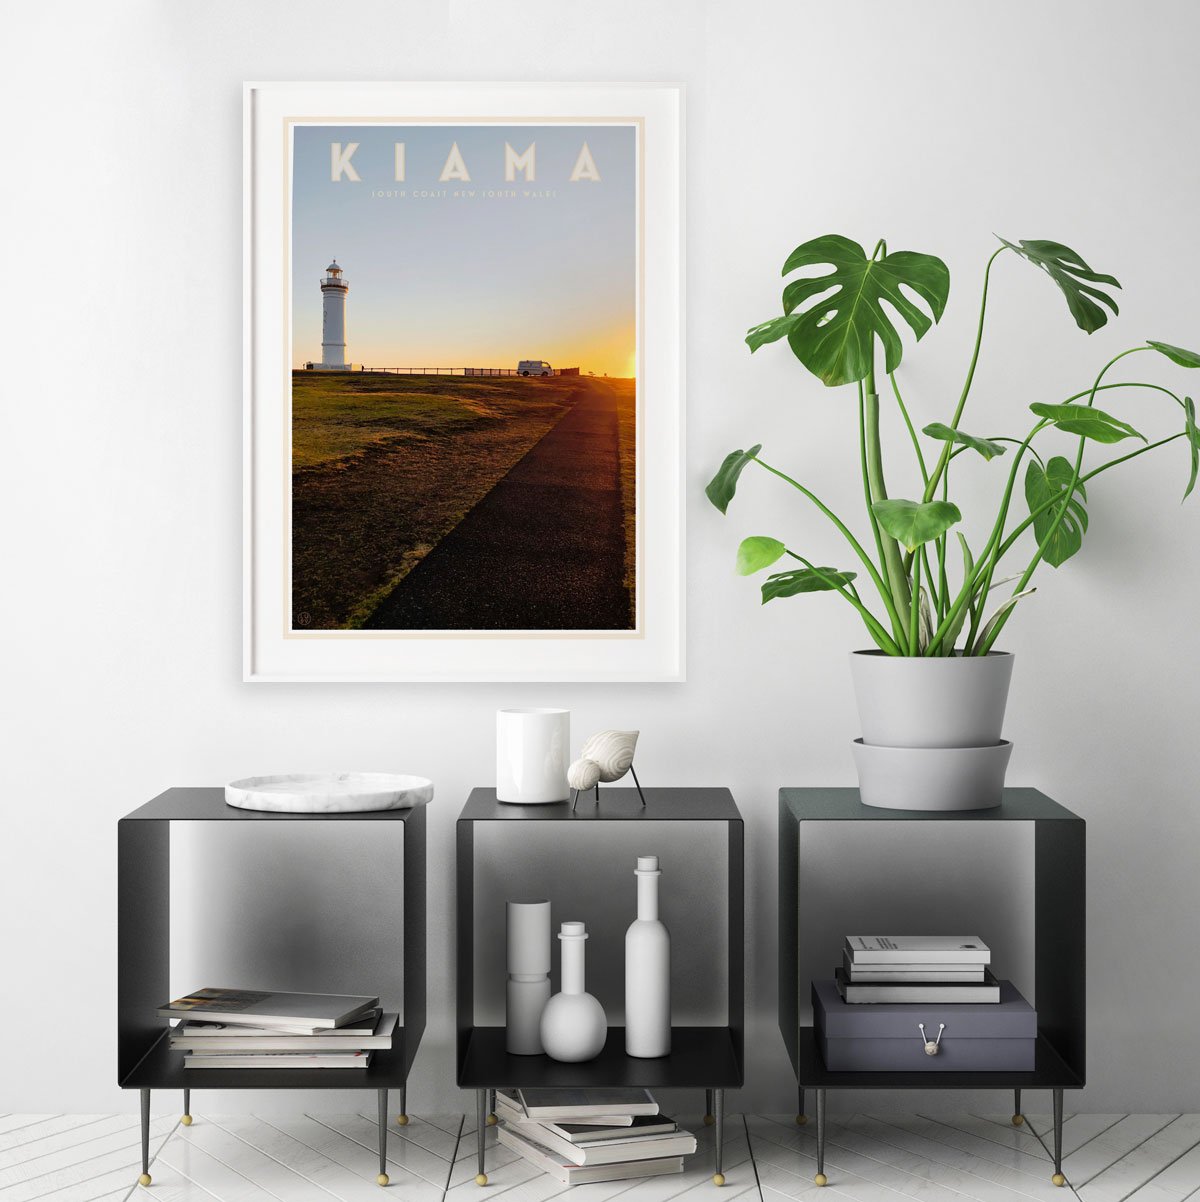 Kiama vintage travel style print in white frame - design by Places We Luv